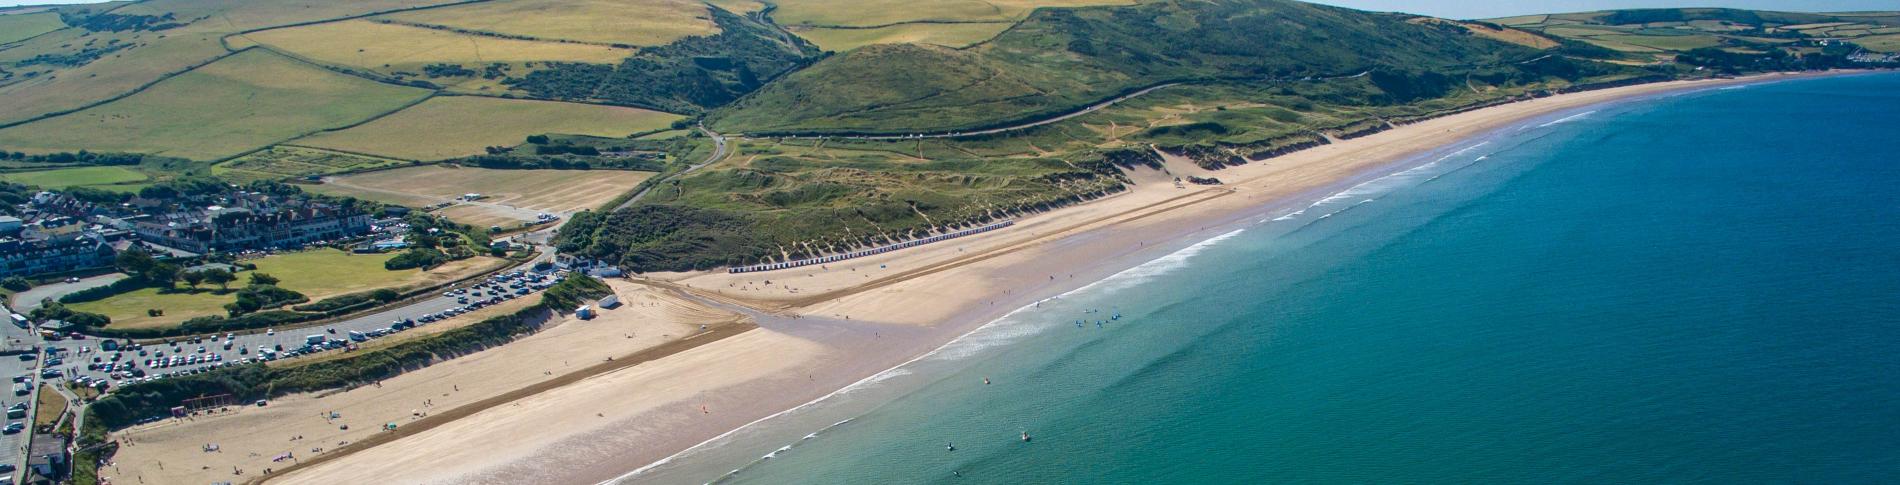 Woolacombe Beach from the air